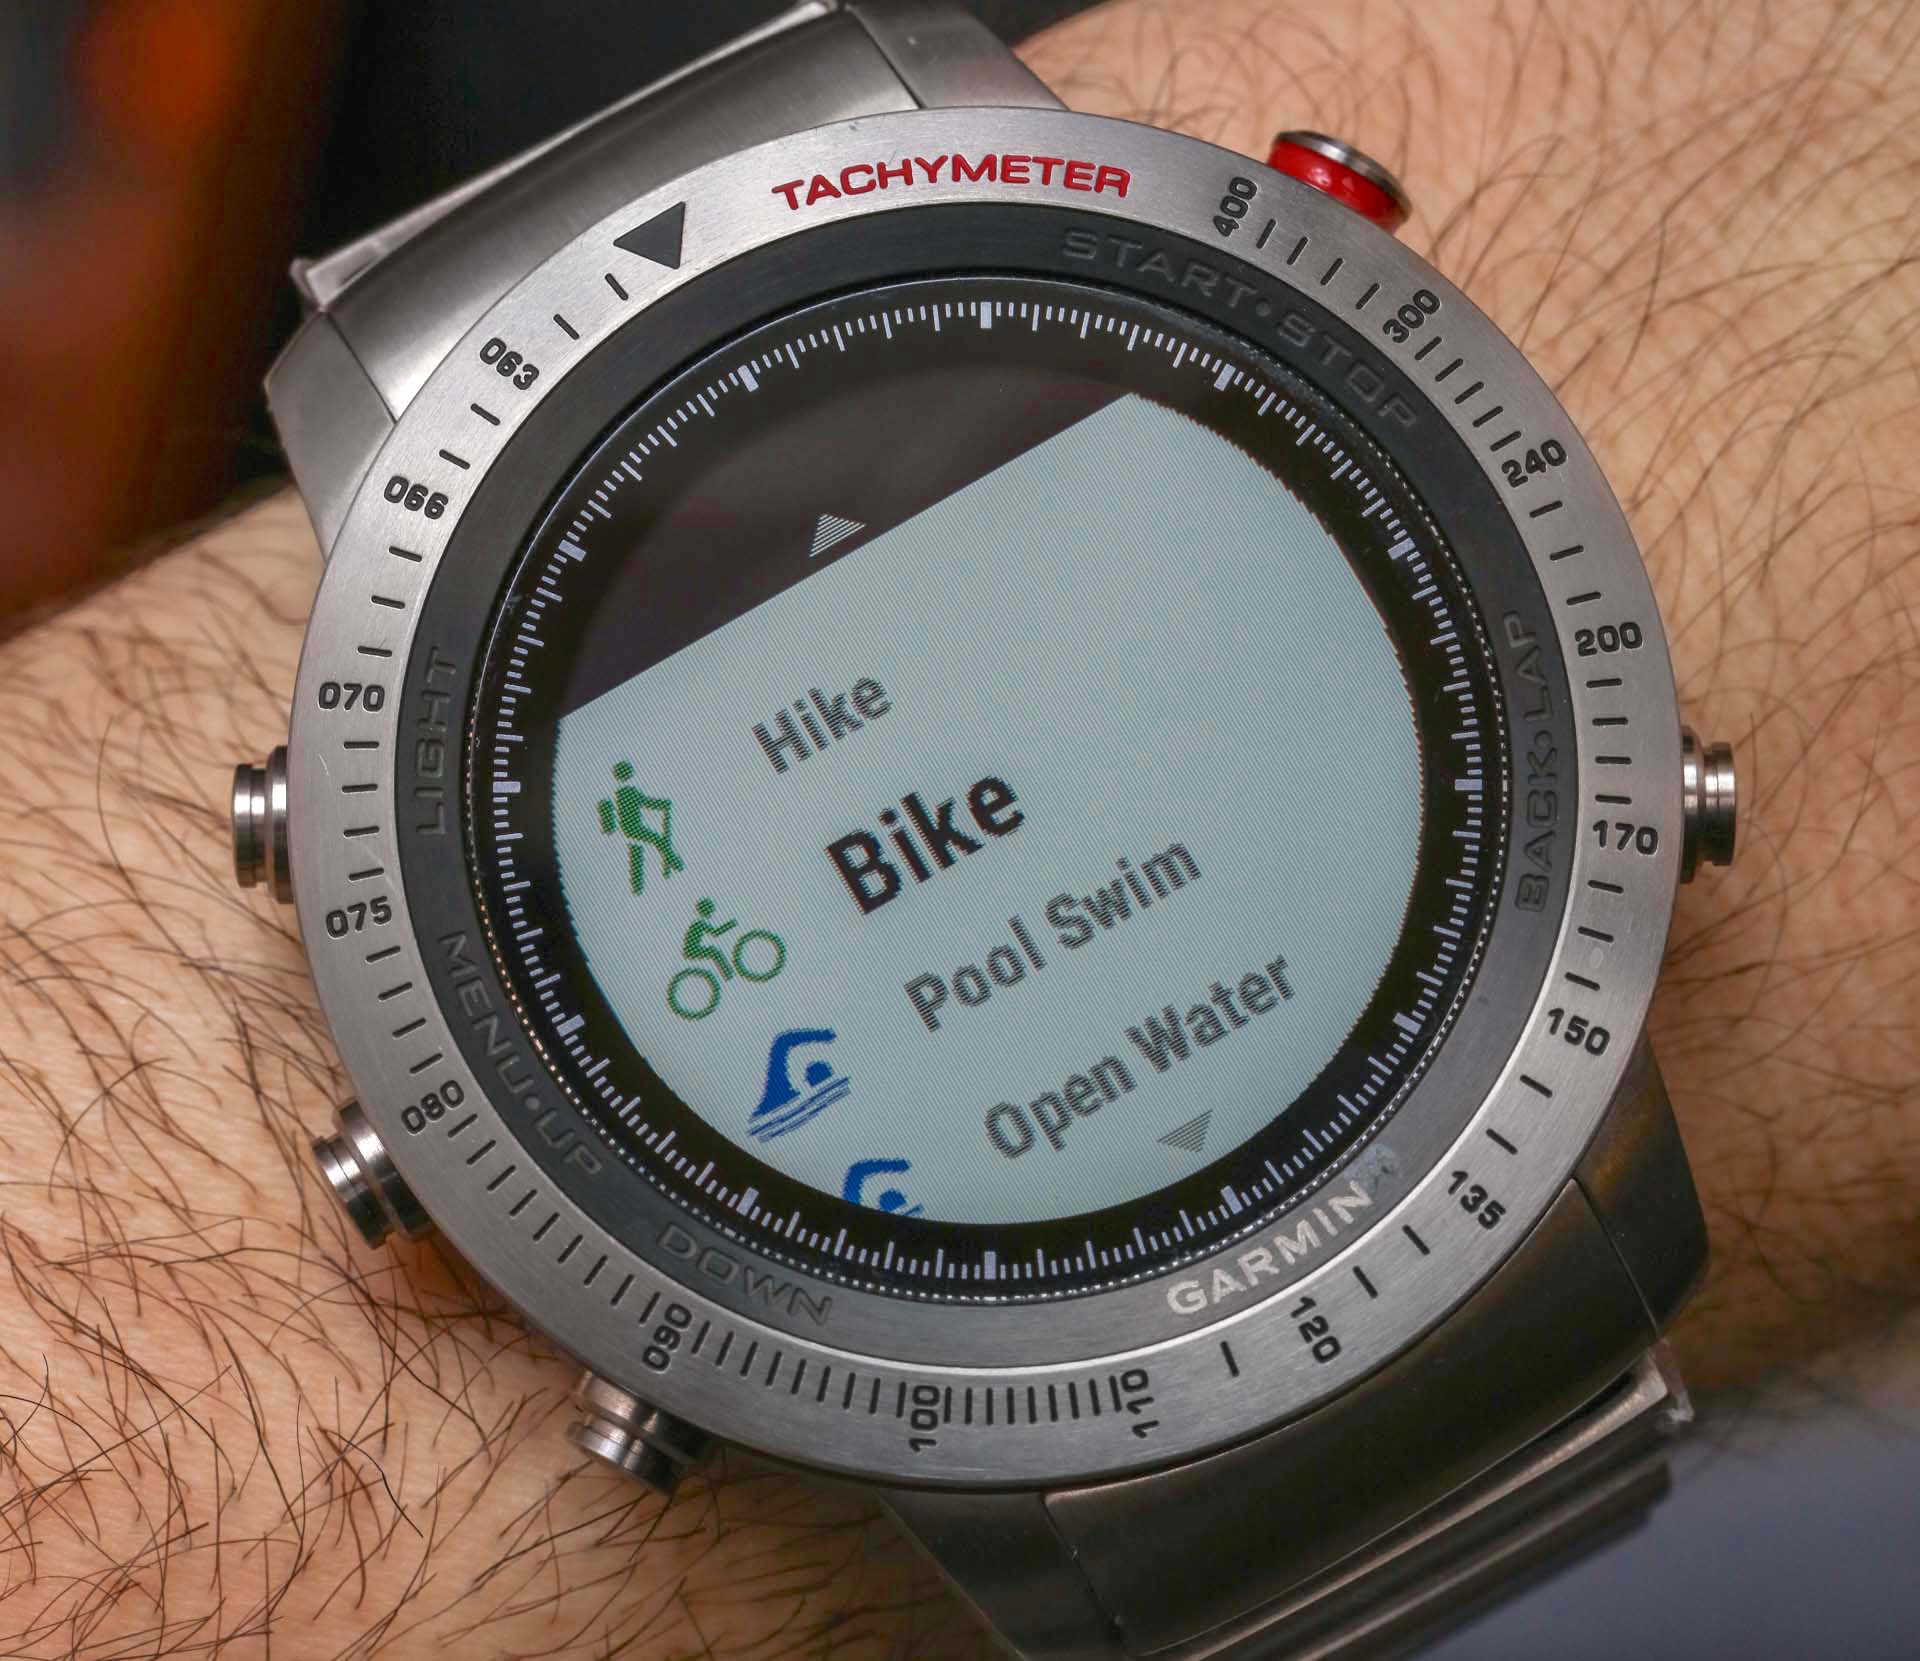 Garmin Vivimove Style Review: Smart, Timeless, Quirky